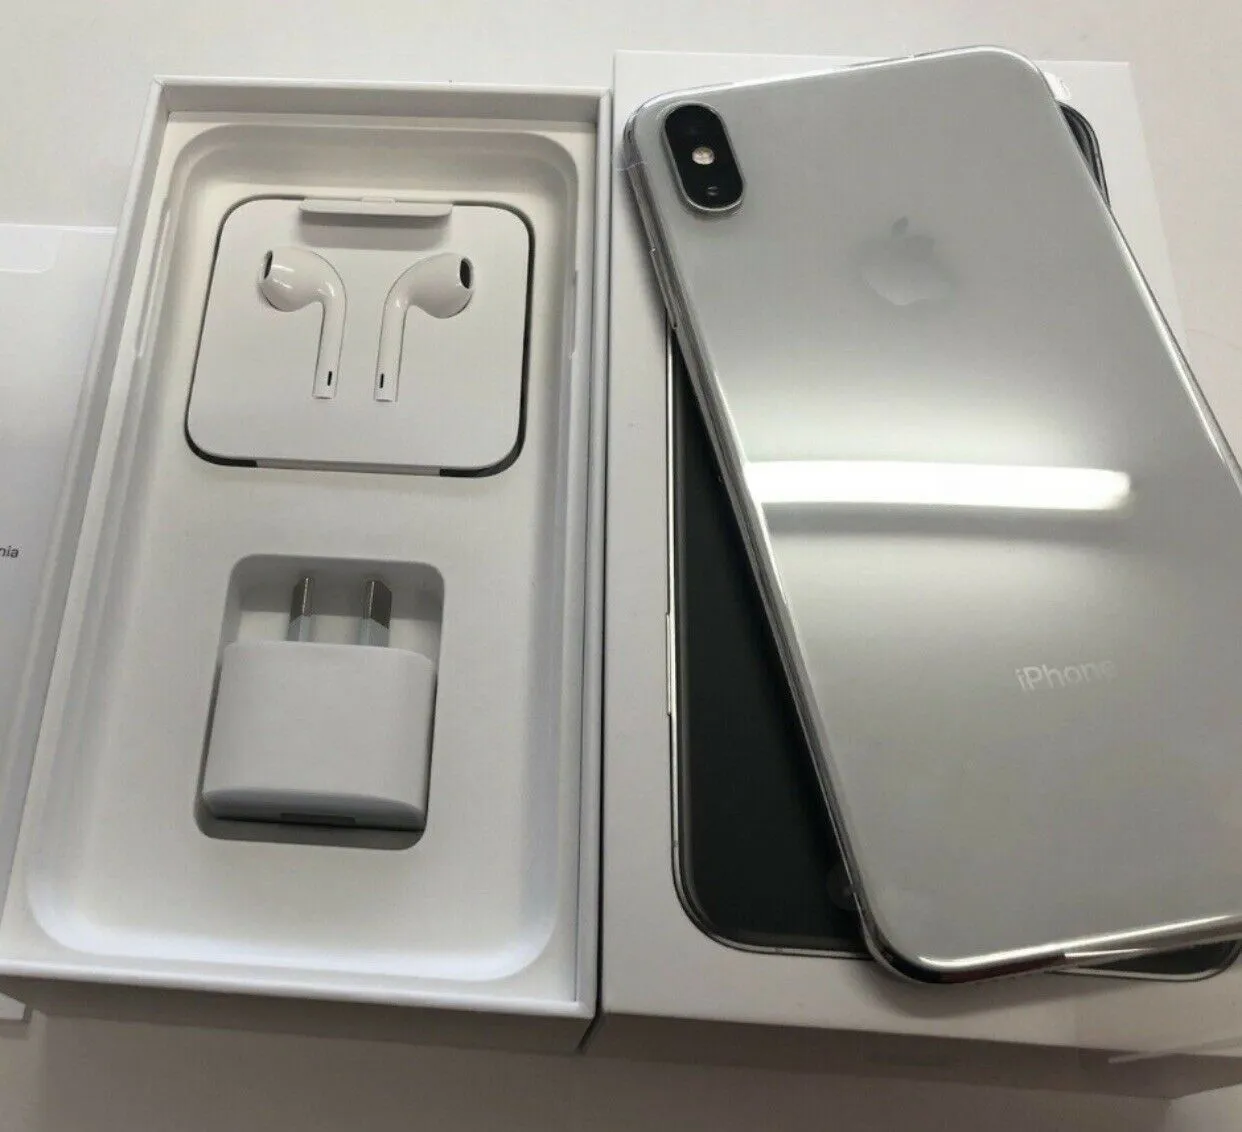 iPhone xs max 512gb available - photo 2